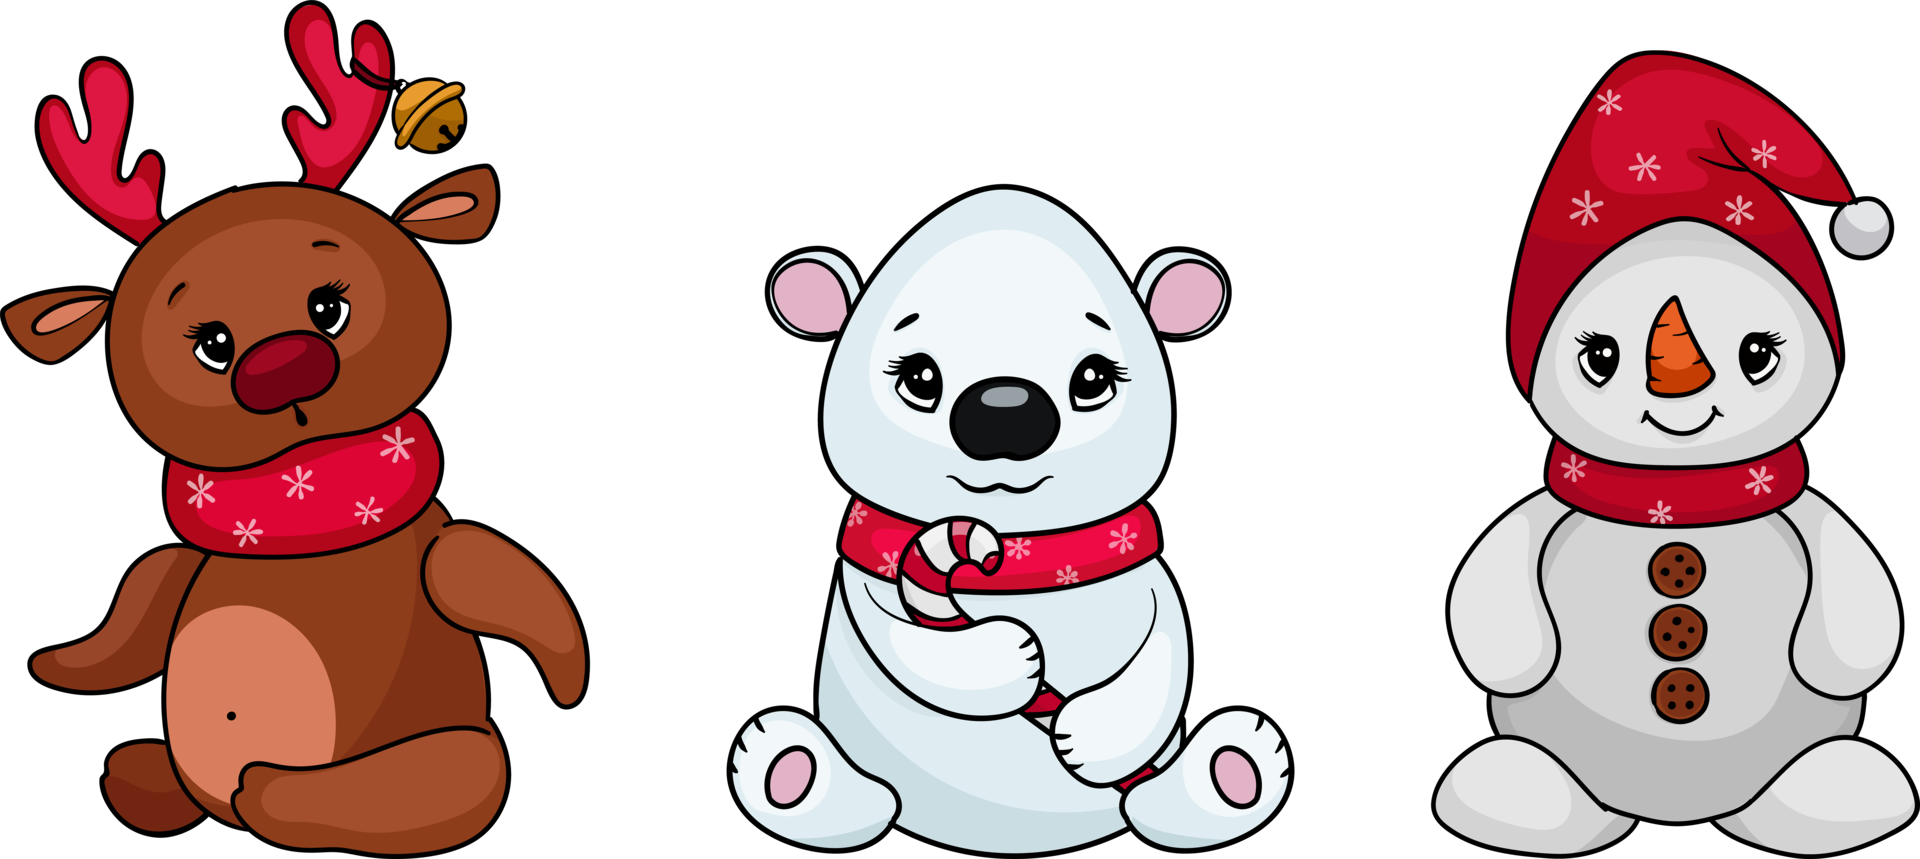 Cute Christmas characters - fawn, snowman, white bear.  illustration in cartoon style png